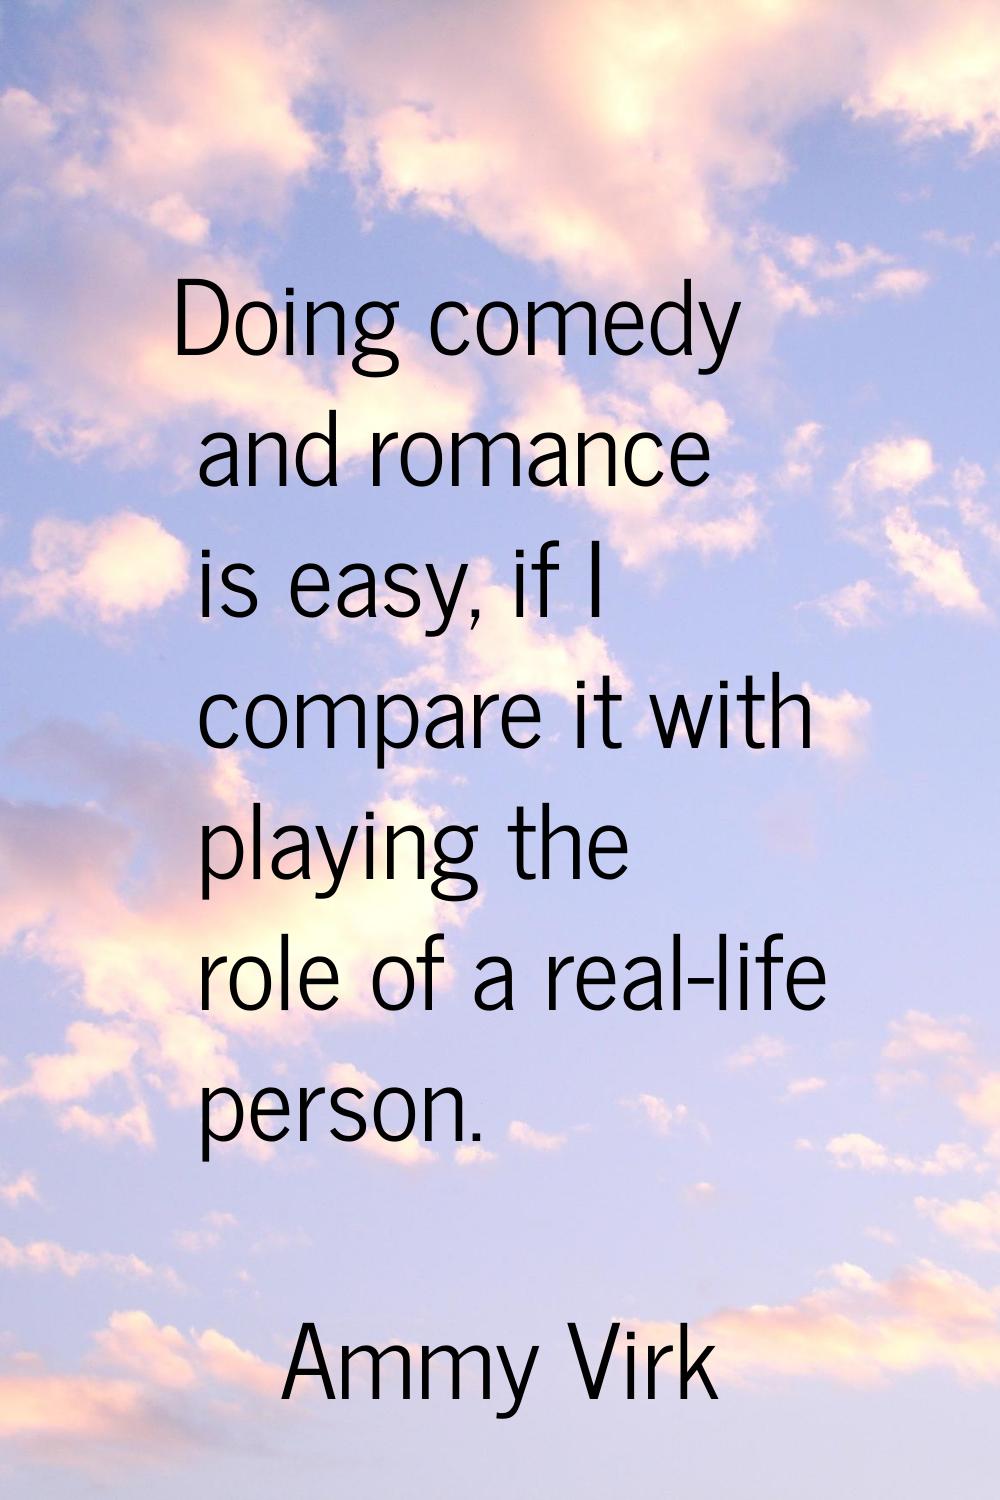 Doing comedy and romance is easy, if I compare it with playing the role of a real-life person.